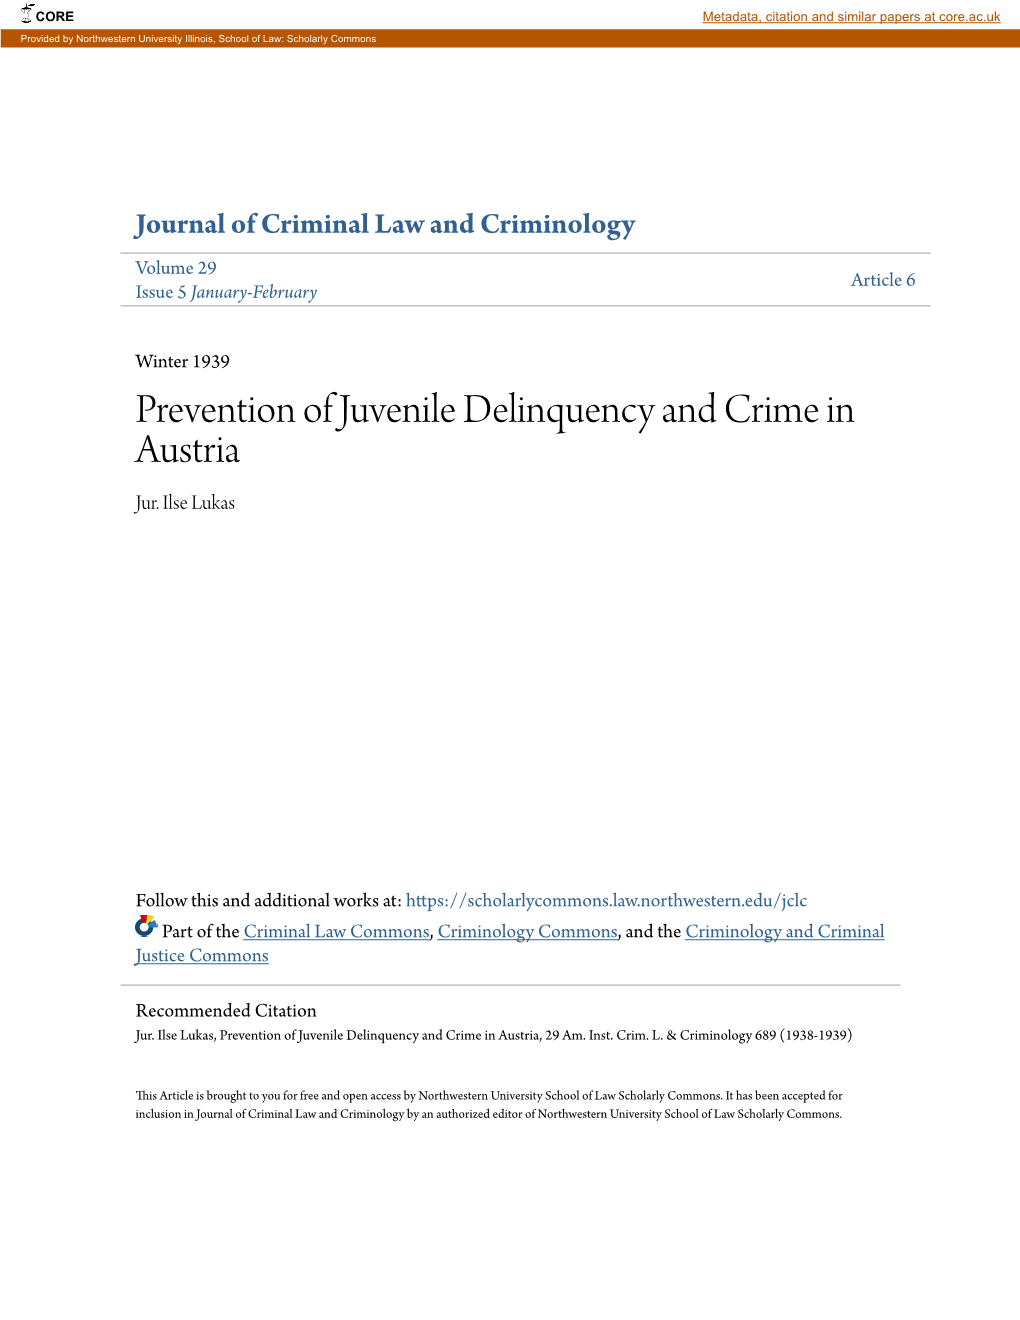 Prevention of Juvenile Delinquency and Crime in Austria Jur